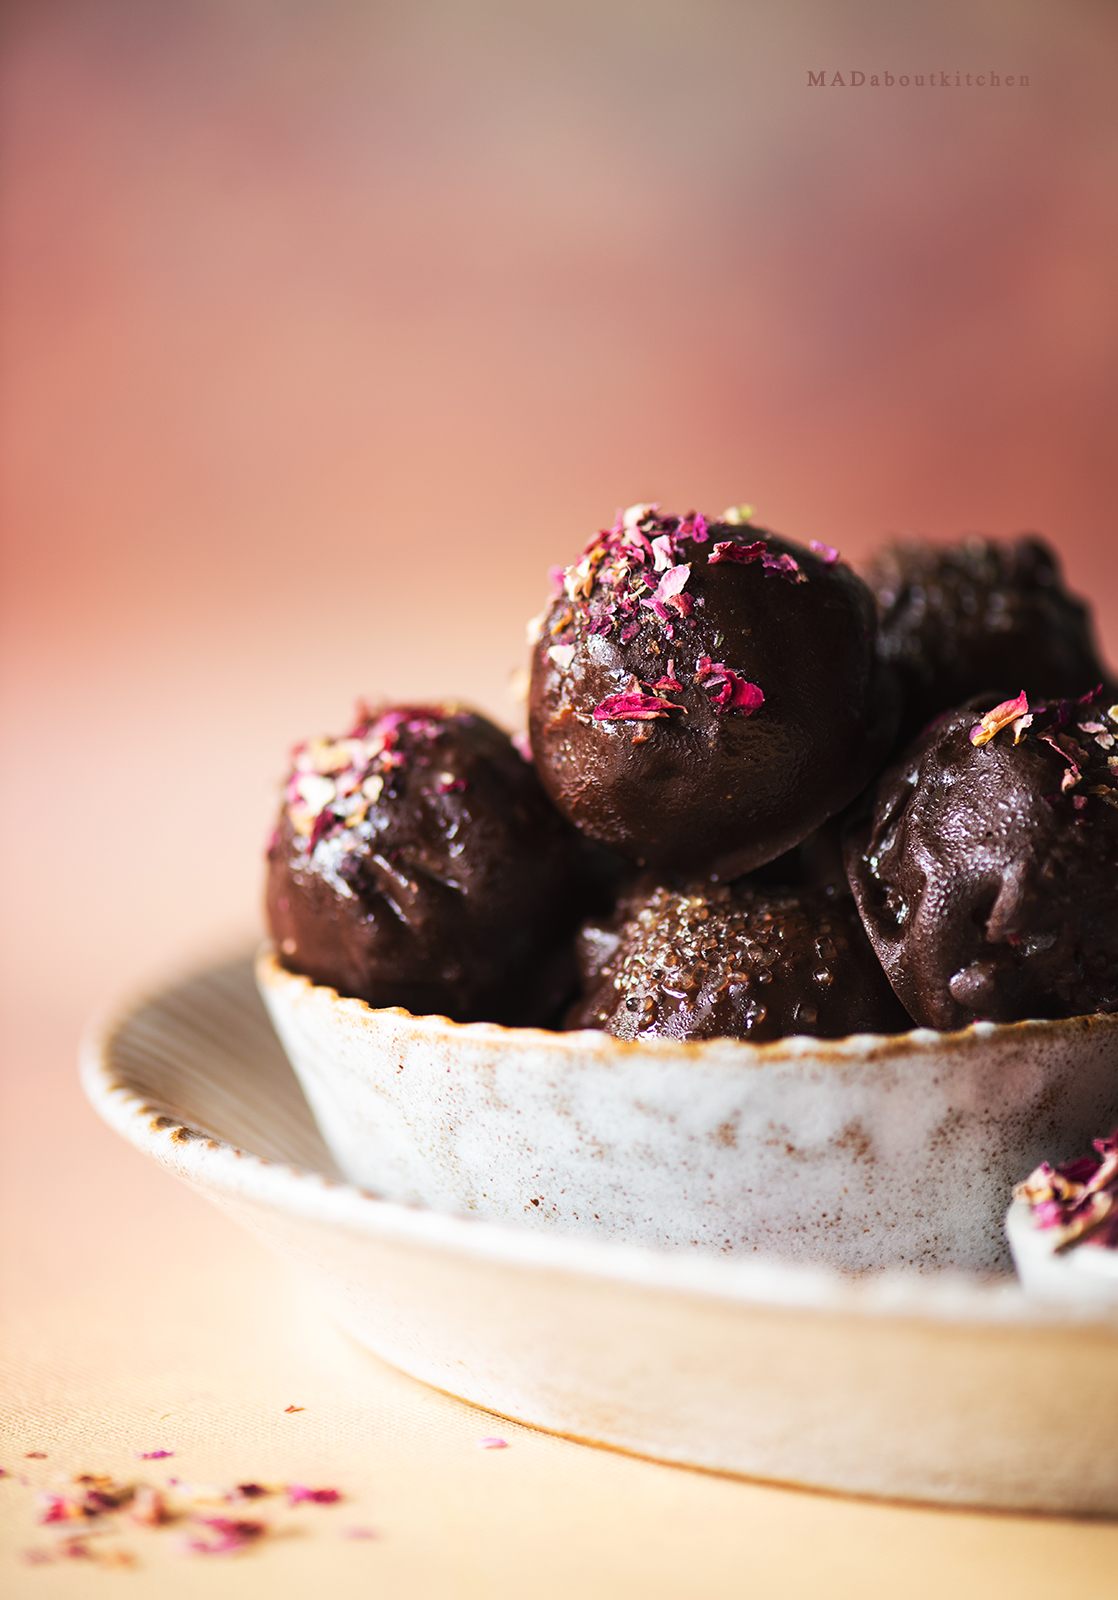 Rose Pistachio homemade truffles are one of the most easiest and simplest desserts one can make and can be made in various flavours.